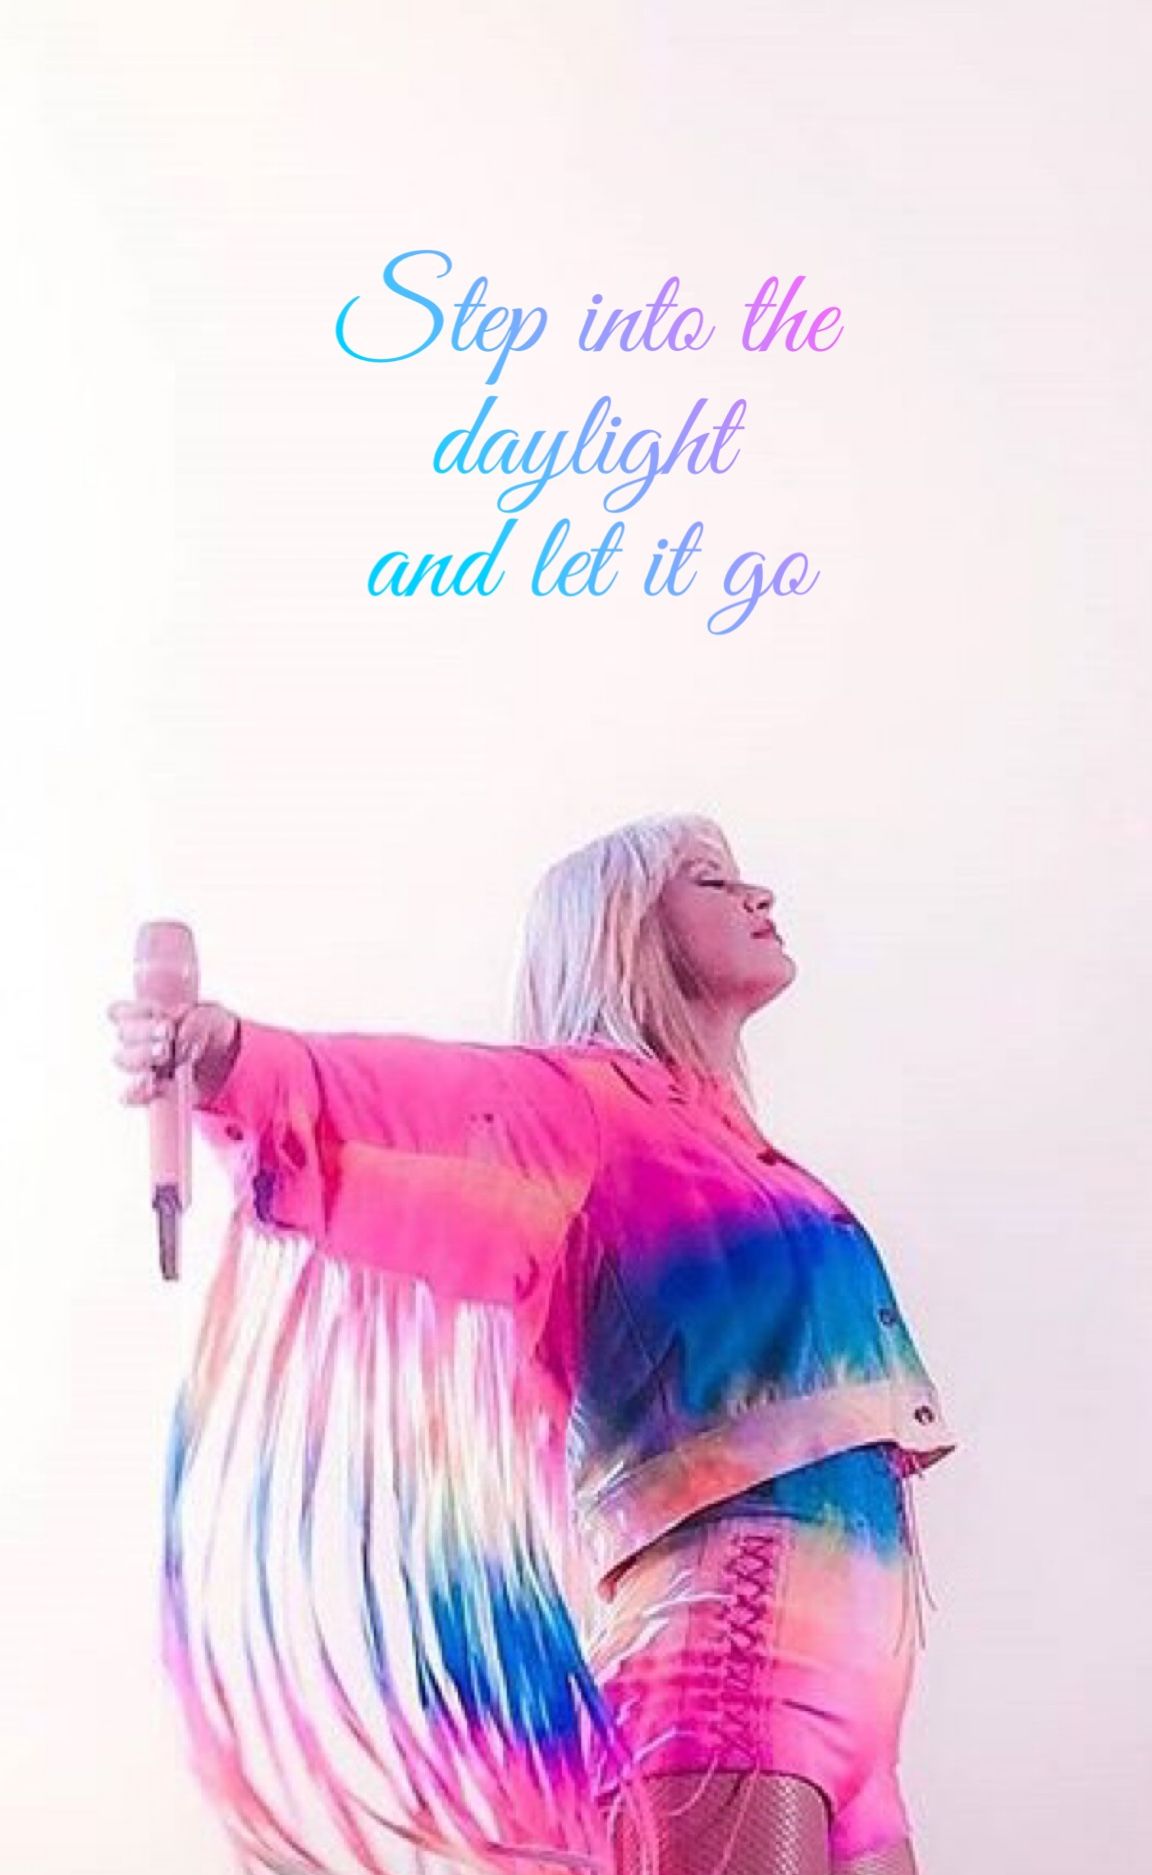 Step into the daylight and let it go ❤️. Taylor swift wallpaper, Taylor alison swift, Taylor swift